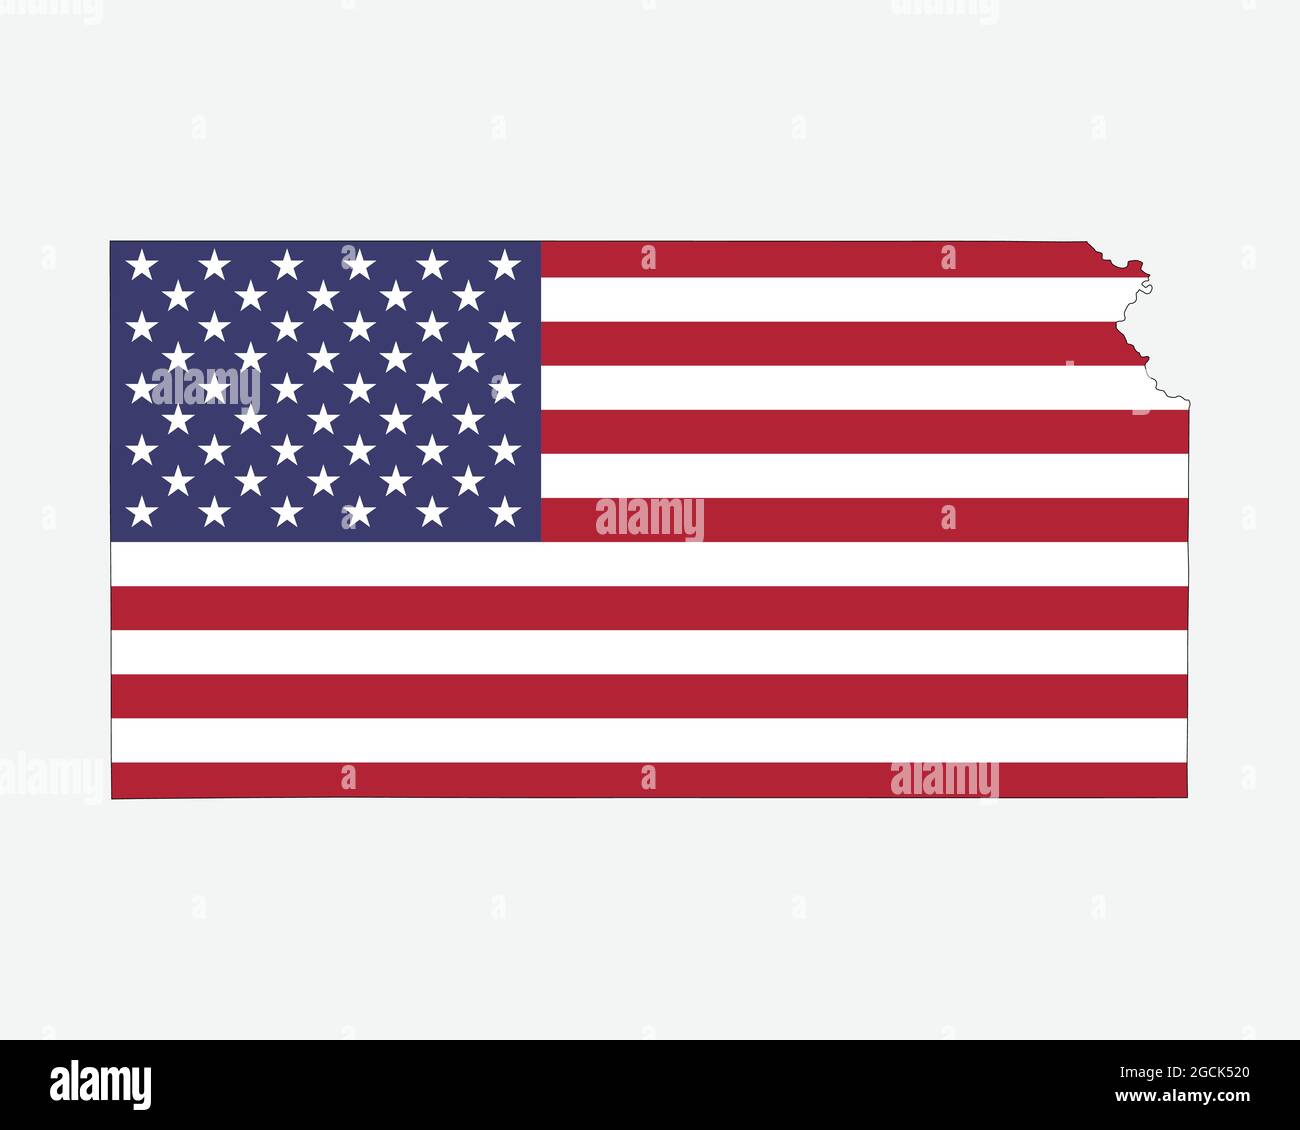 Kansas Map on American Flag. KS, USA State Map on US Flag. EPS Vector Graphic Clipart Icon Stock Vector